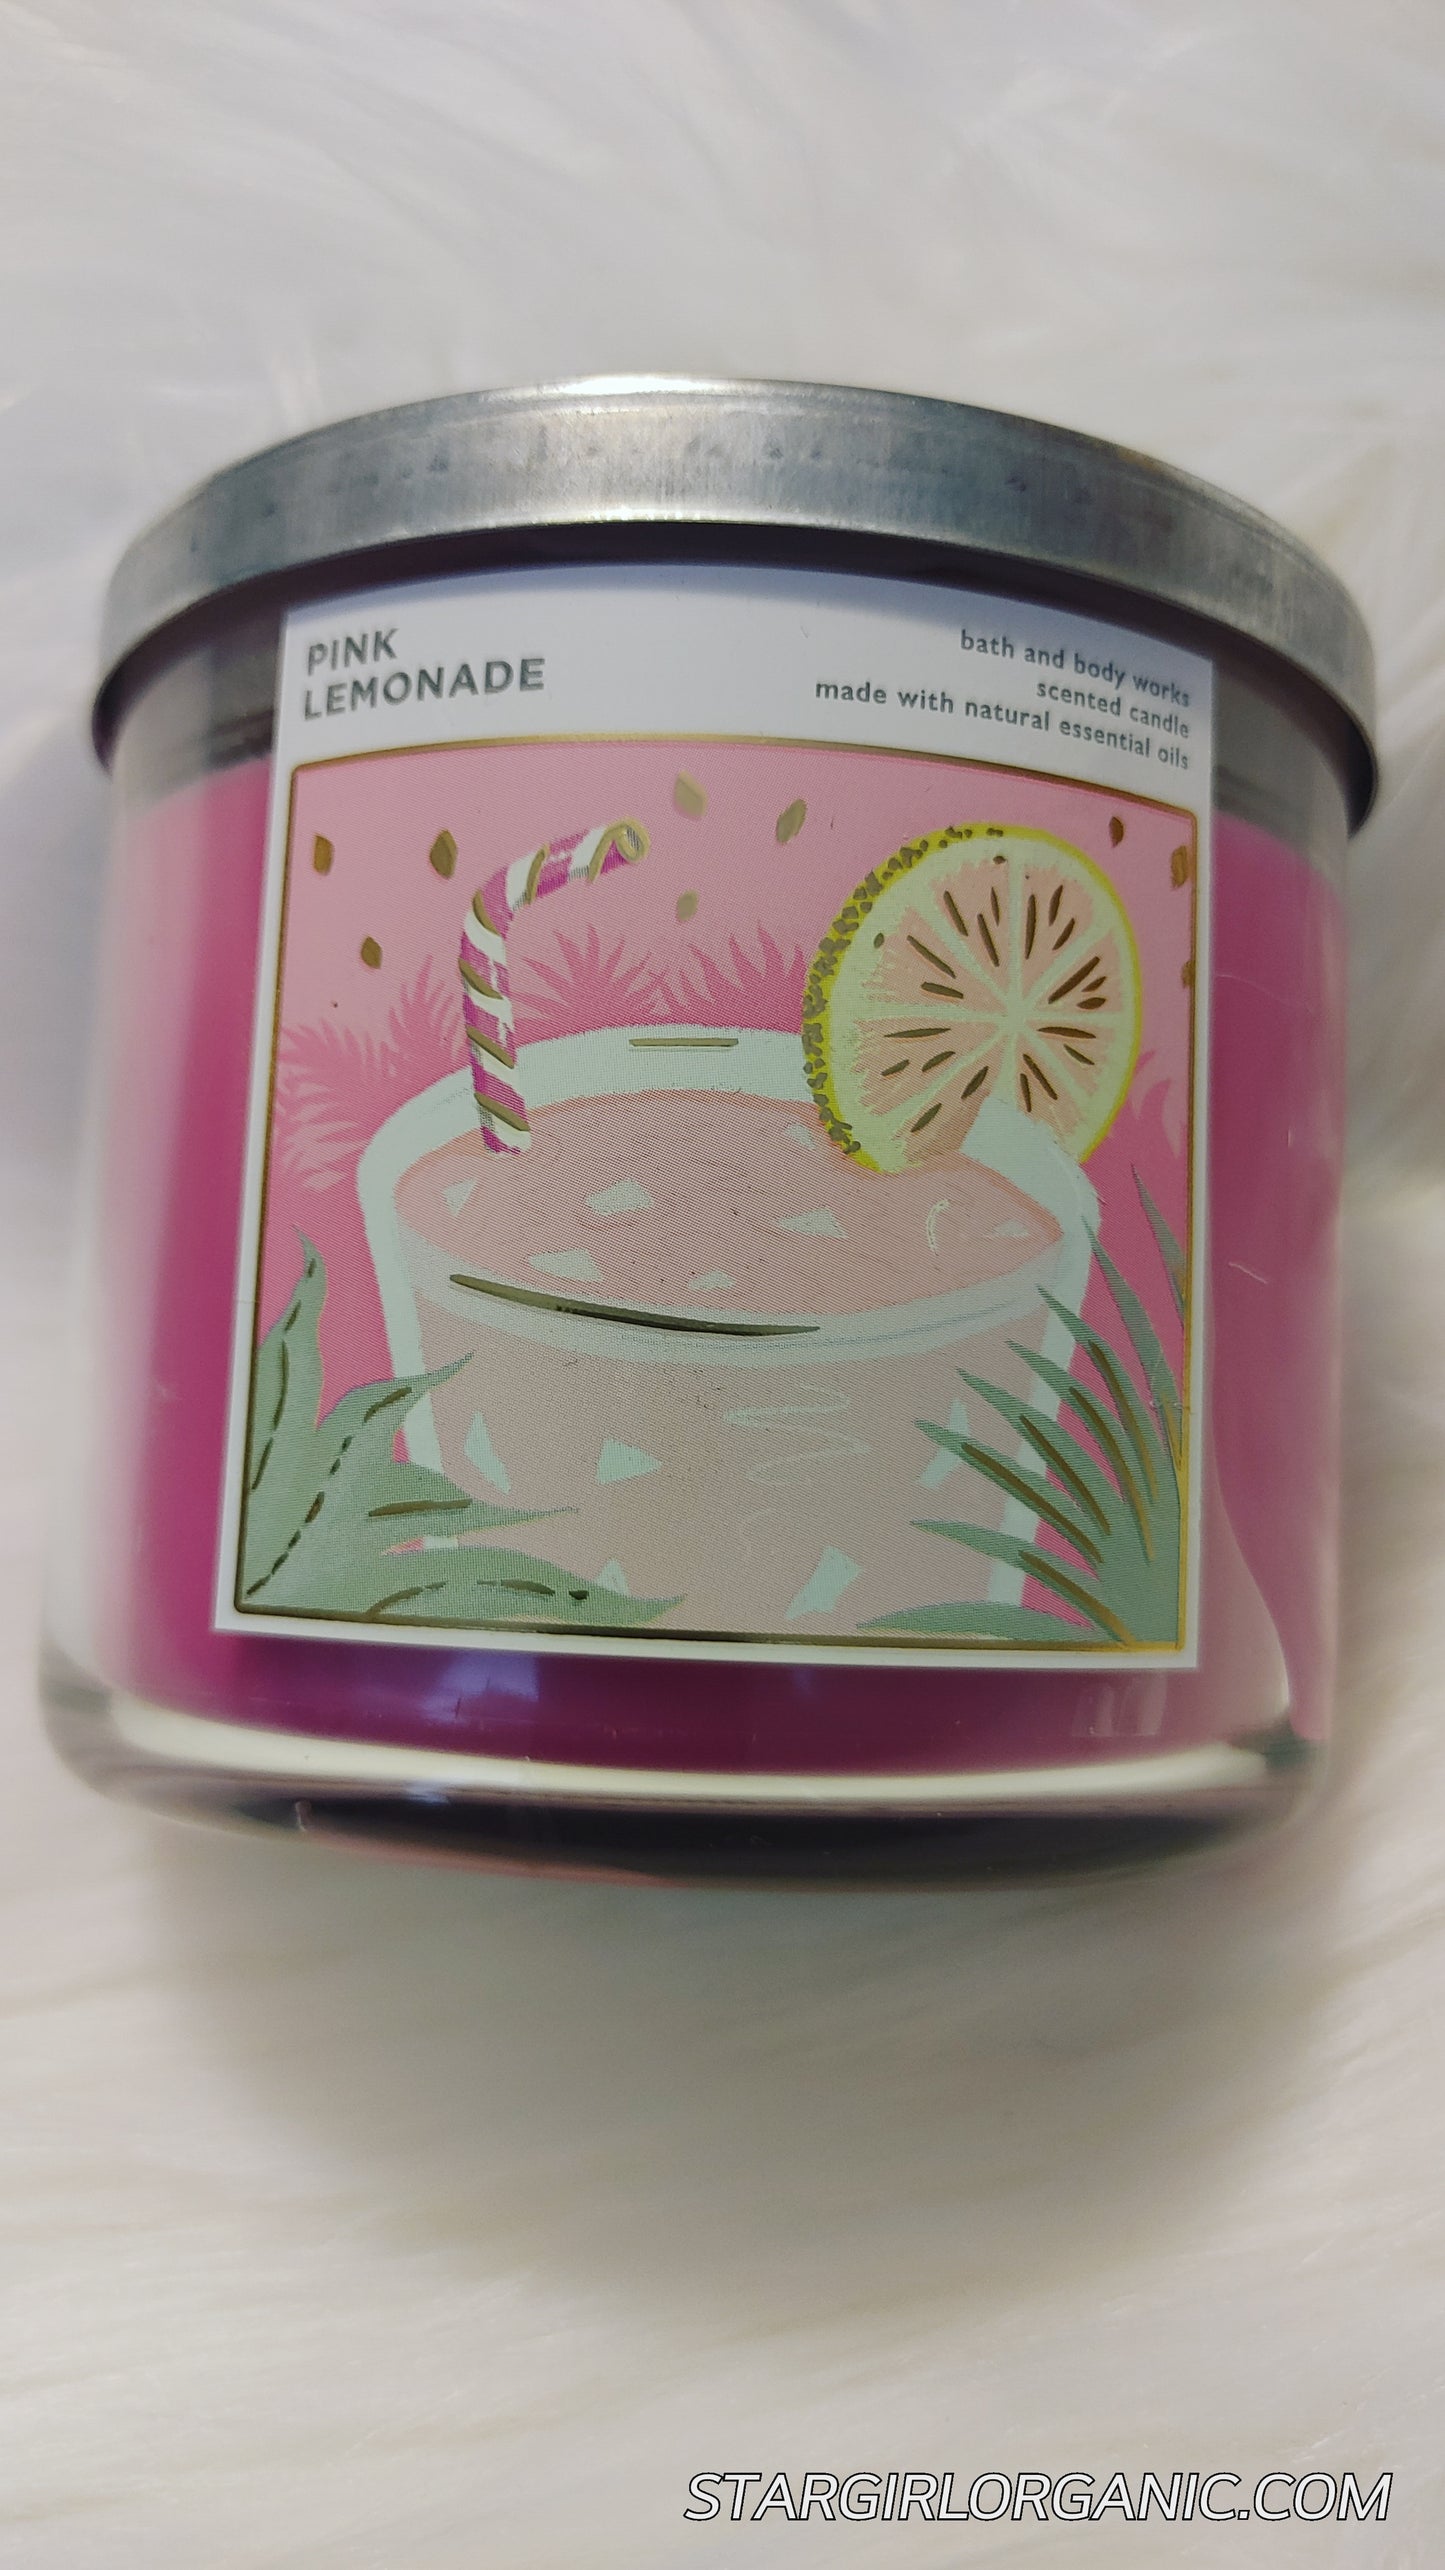 Bath & Body Works Pink Lemonade 3 Wick Candle Made with Natural Essential Oils